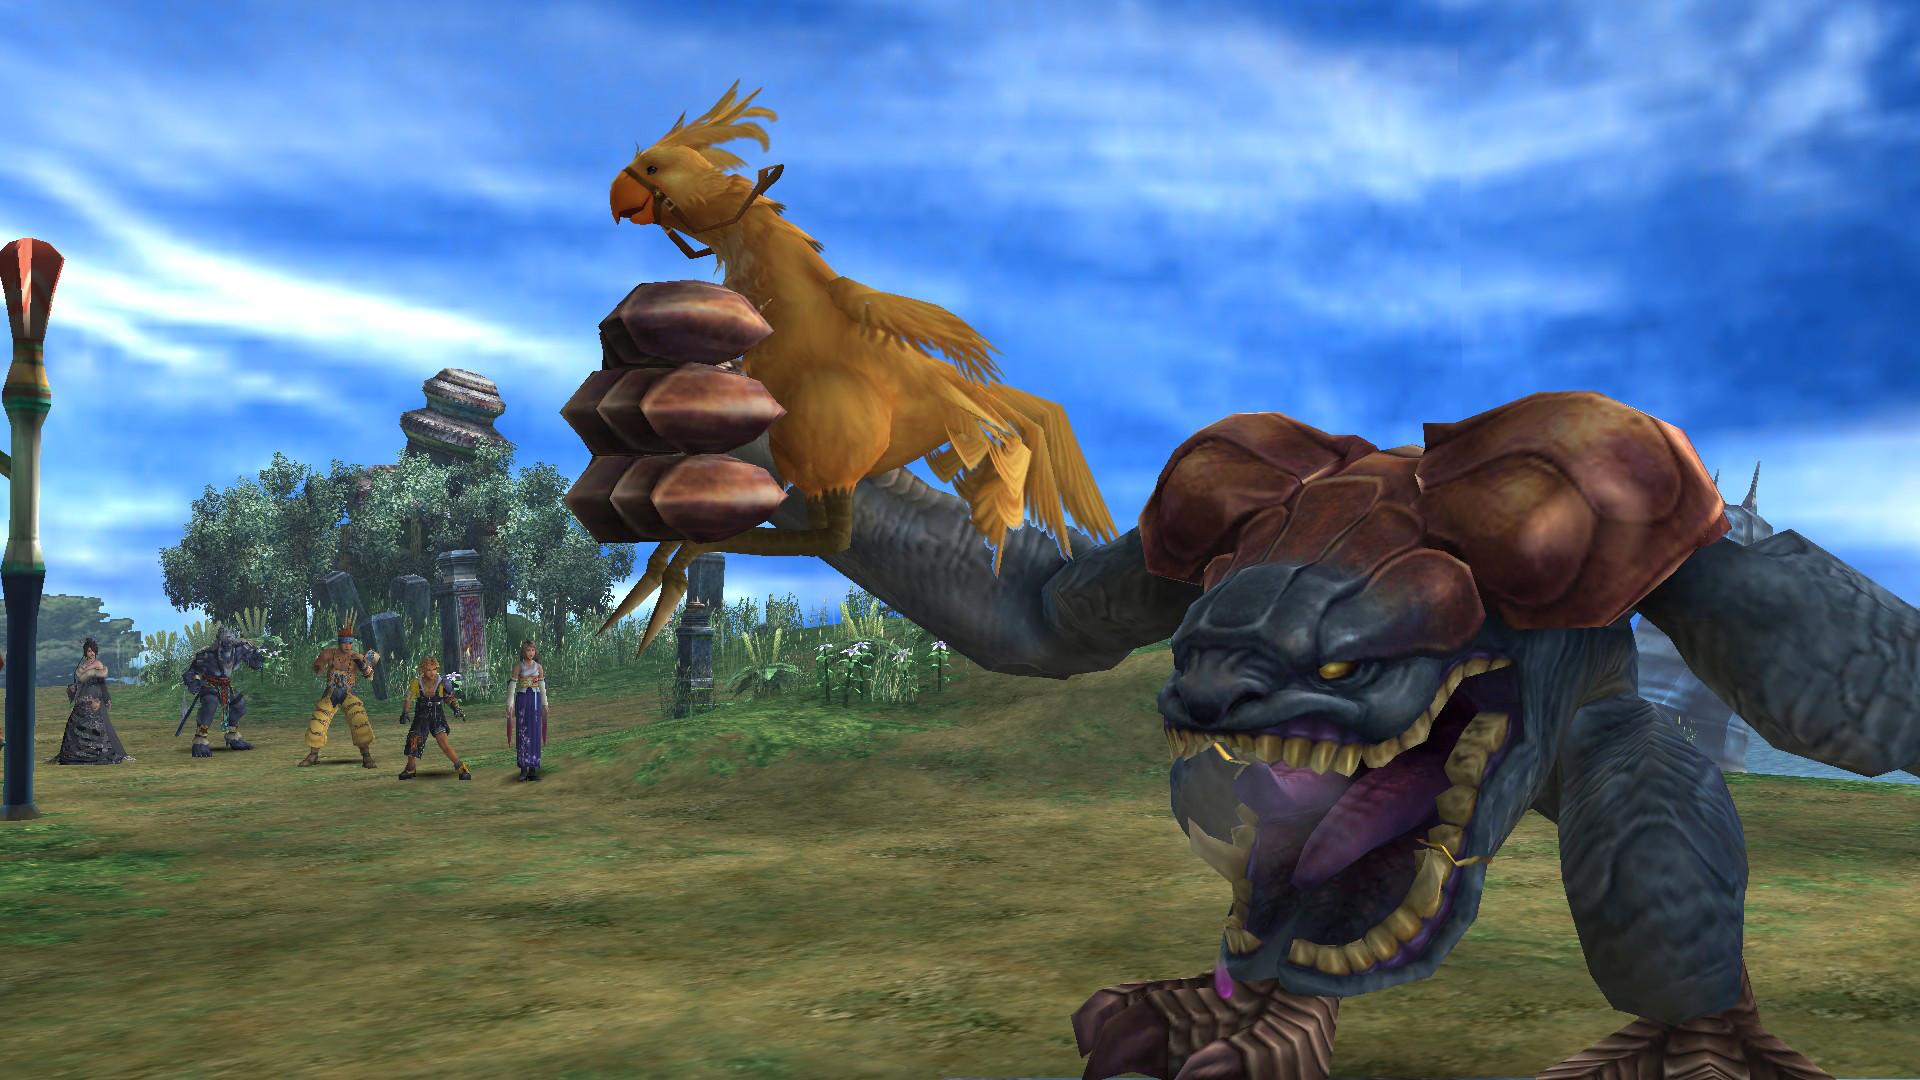 1920x1080 Chocobo_eater_catches_a_chocobo.jpg